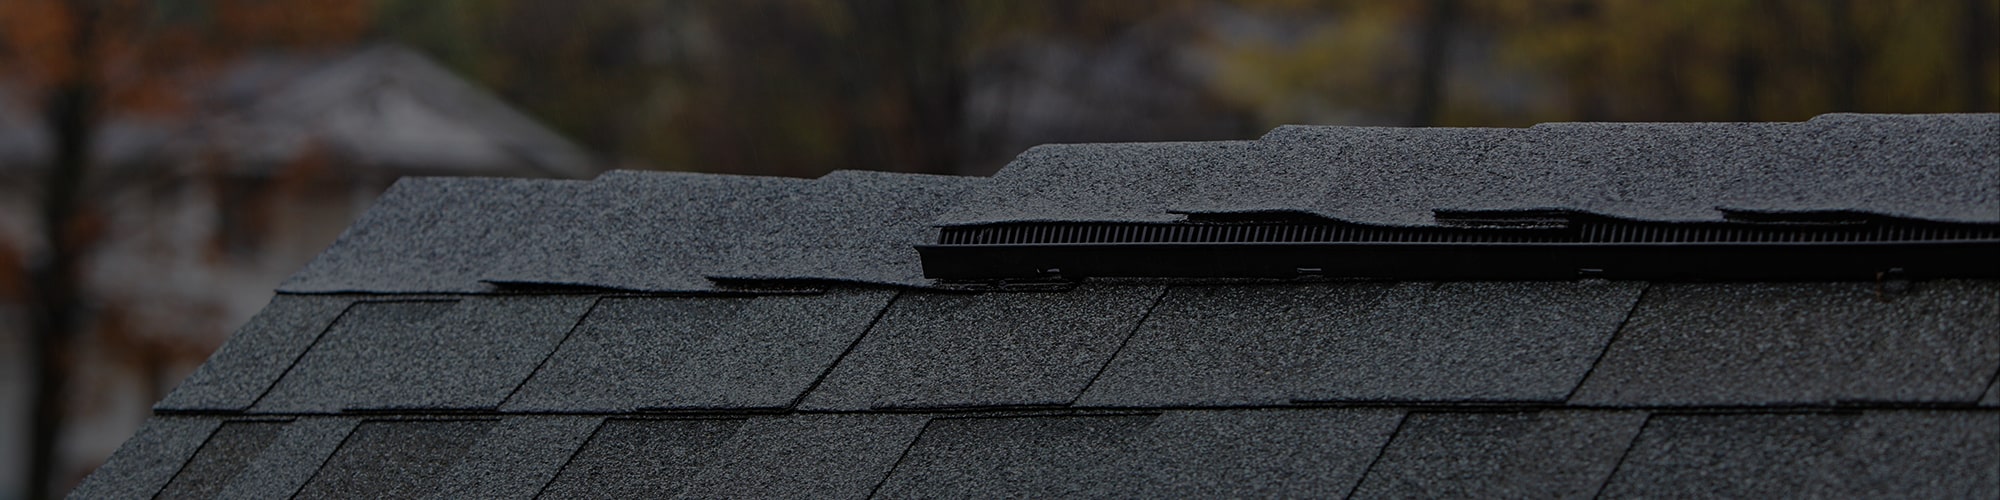 Roofing ventilation systems for residential and commercial buildings in Michigan